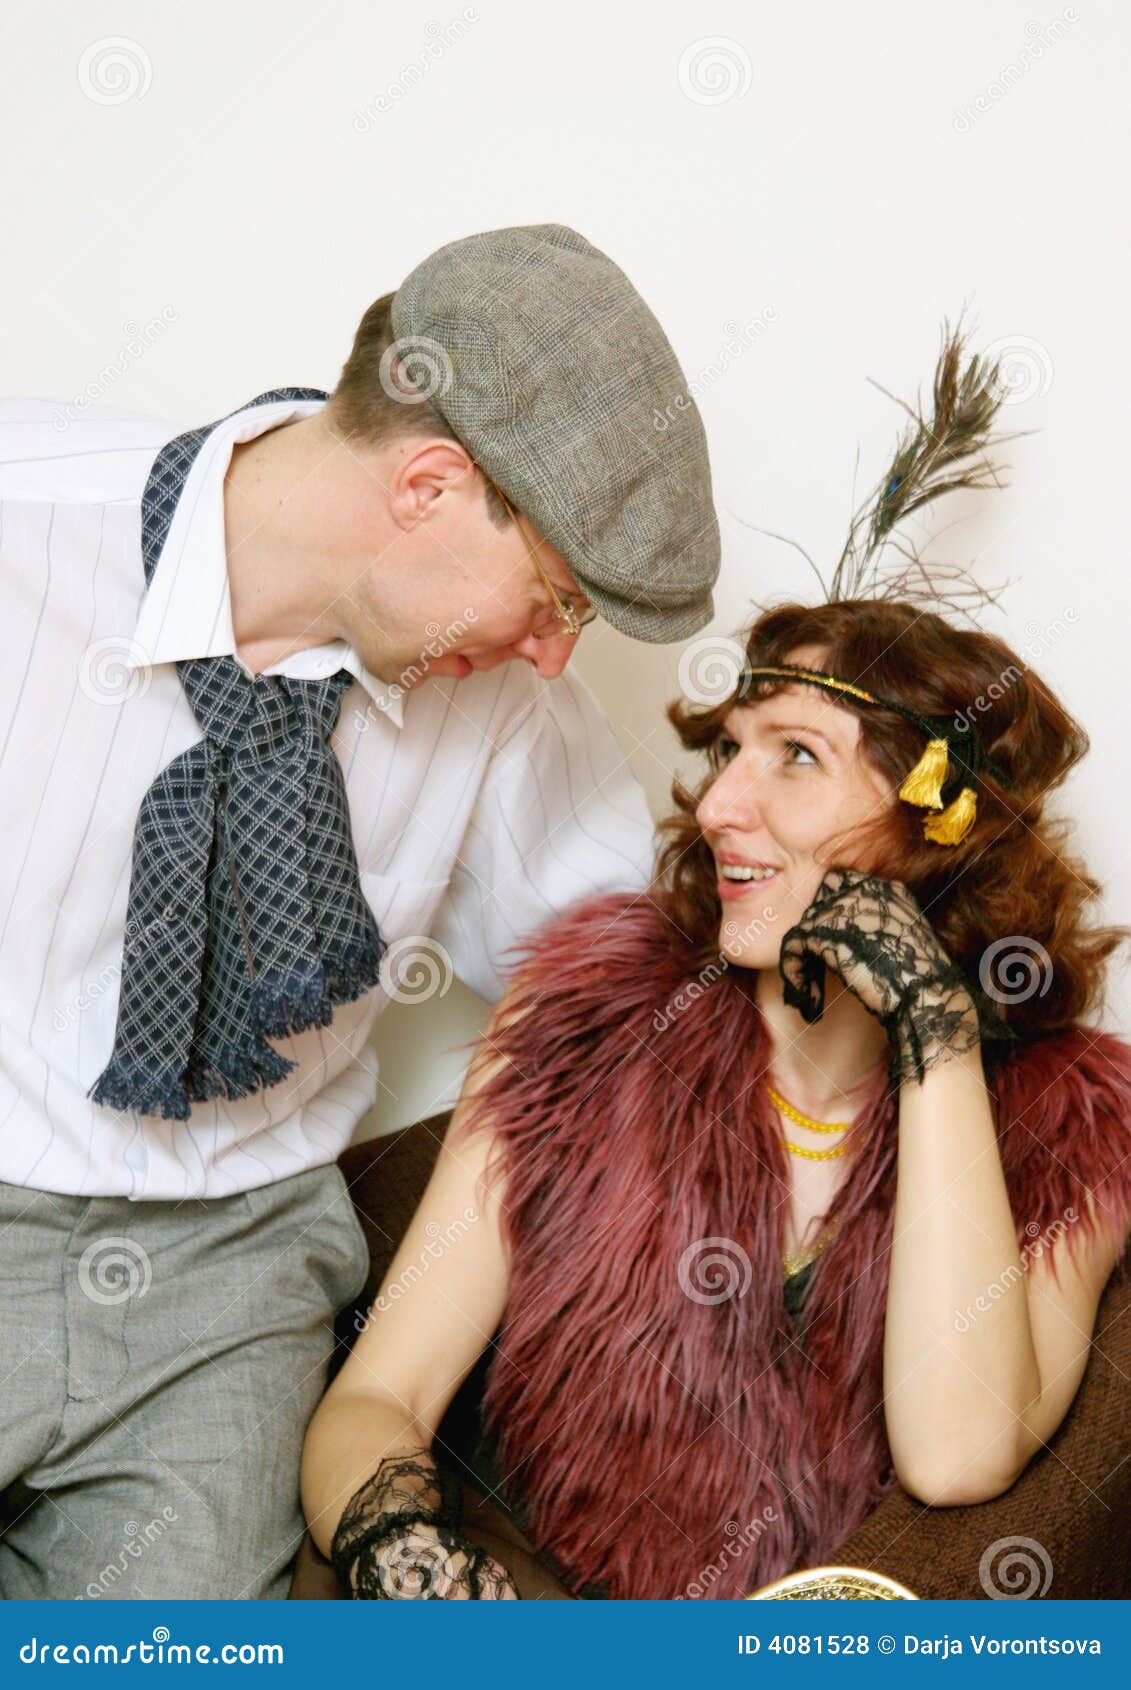 couple in 1920s style